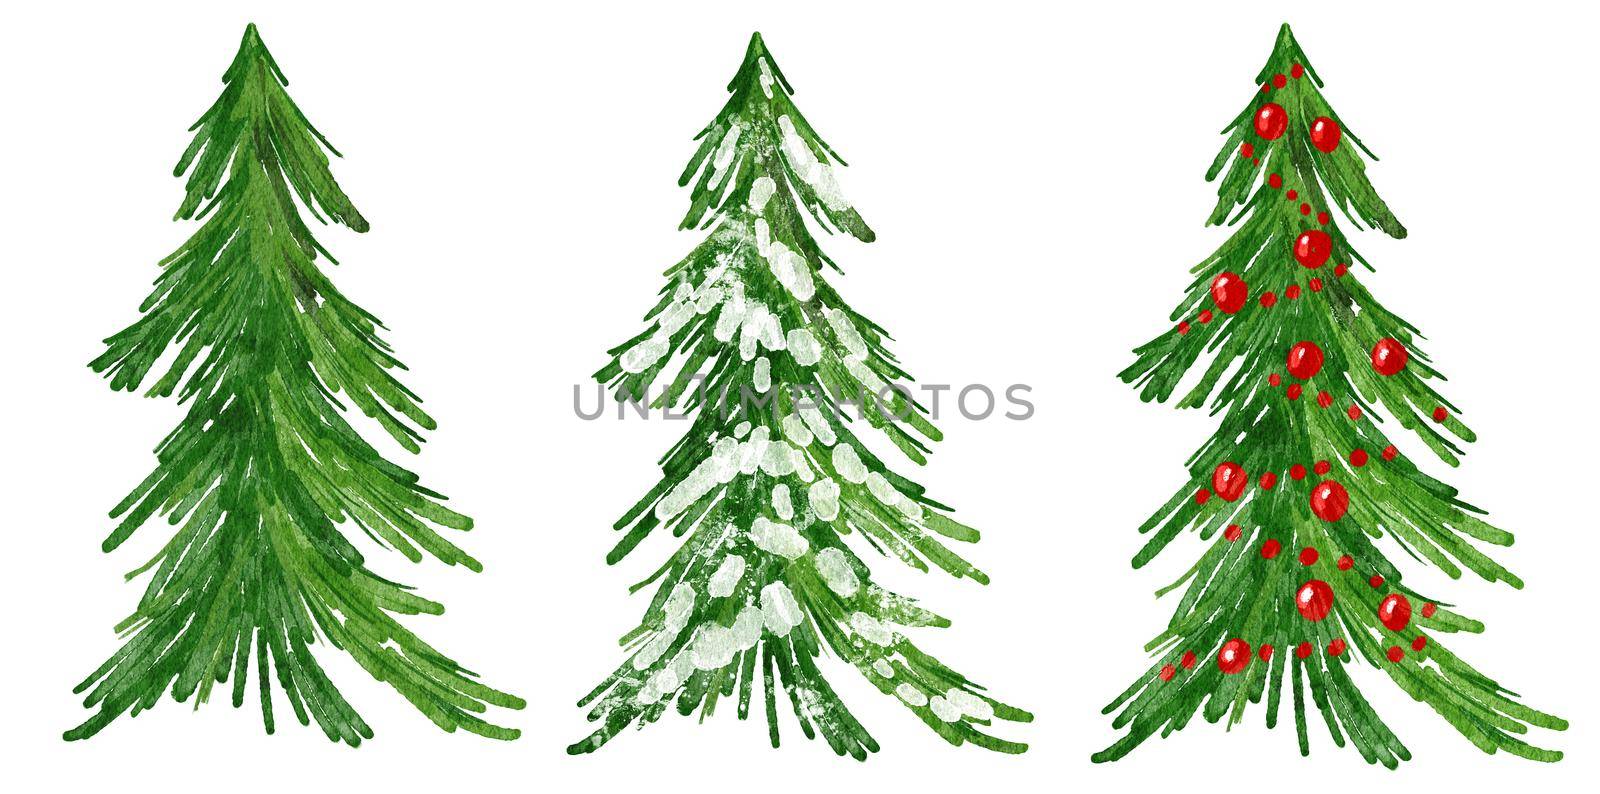 Watercolor hand drawn illustration of Christmas tree. Winter new year evergreen fir pine spruce plant. December season celebration design, holiday party print for invitations cards, isolated on white background. by Lagmar